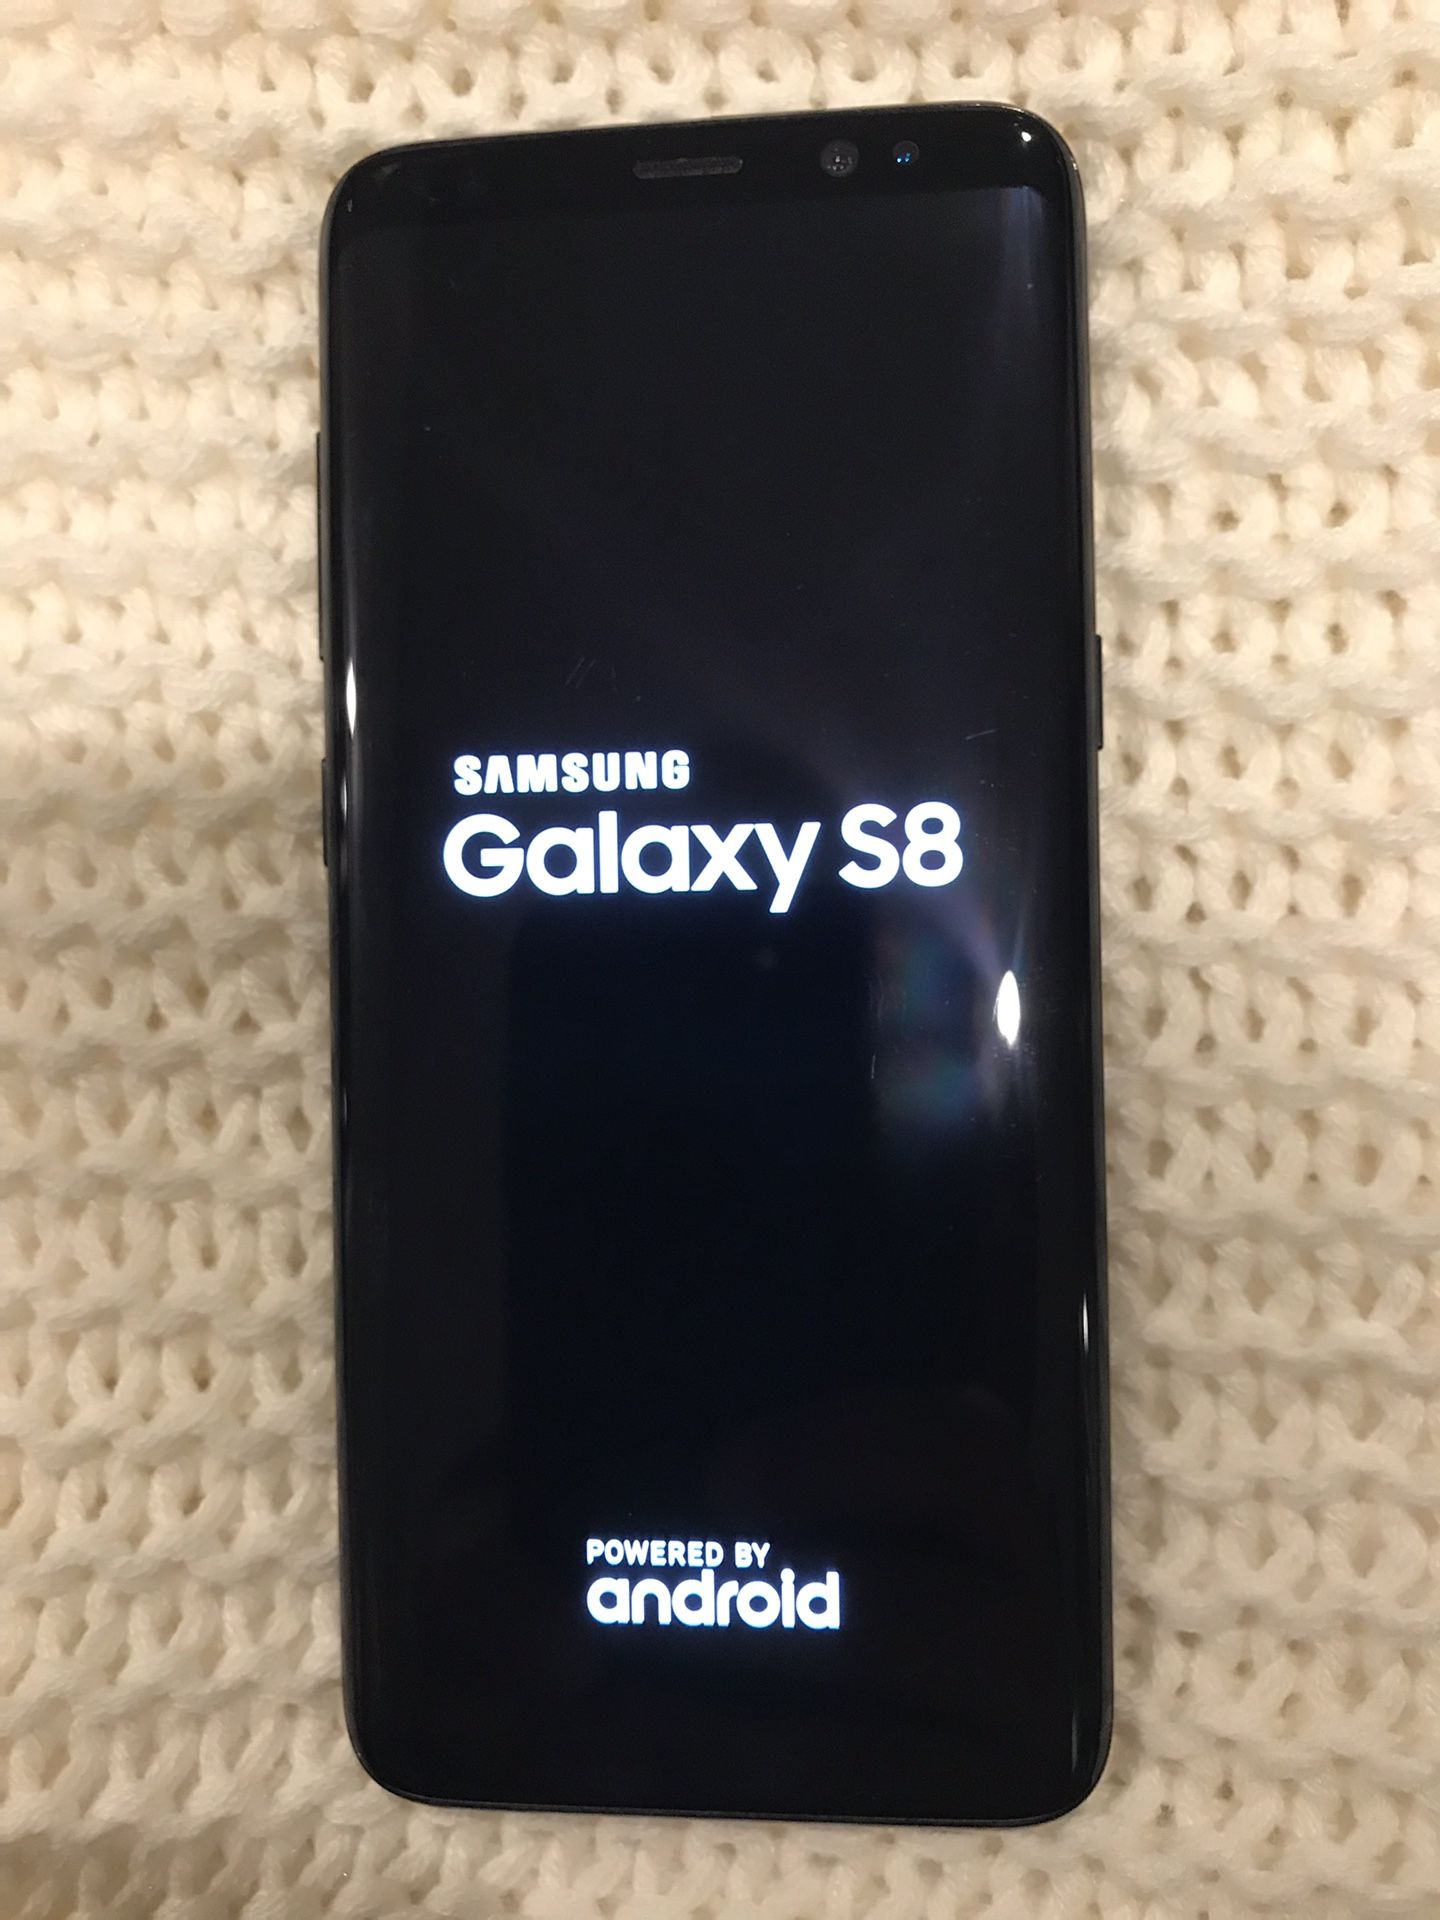 EXCELLENT CONDITION Samsung Galaxy S8 64GB (T-Mobile) UNLOCKED +USB CABLE +CHARGER $250 FIRM